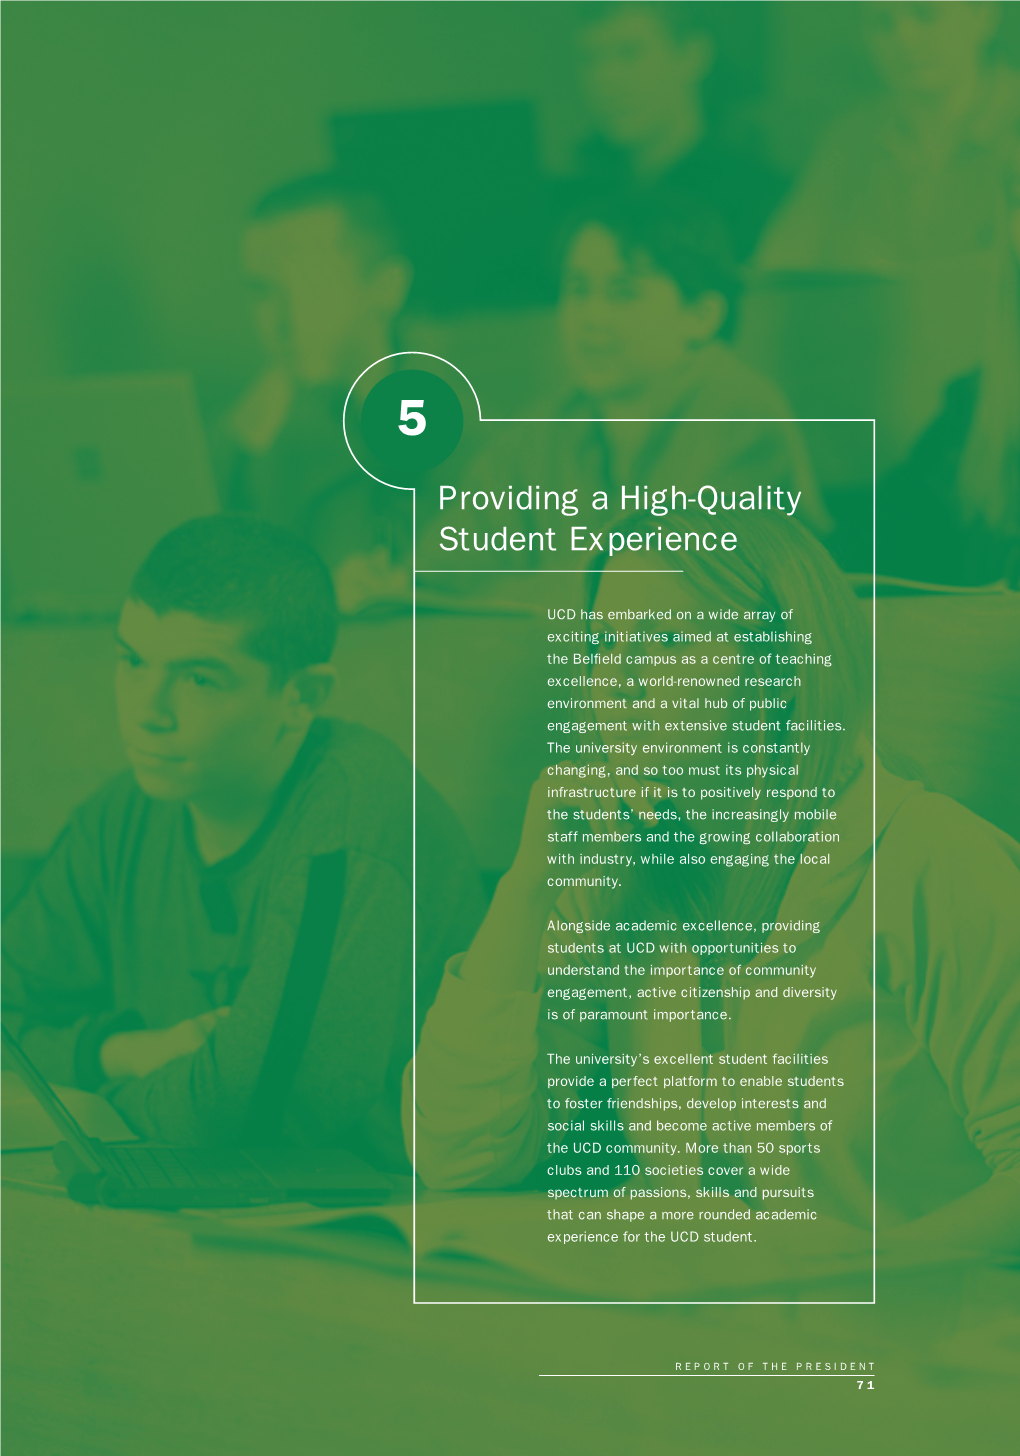 Providing a High-Quality Student Experience (PDF, 1.32MB)